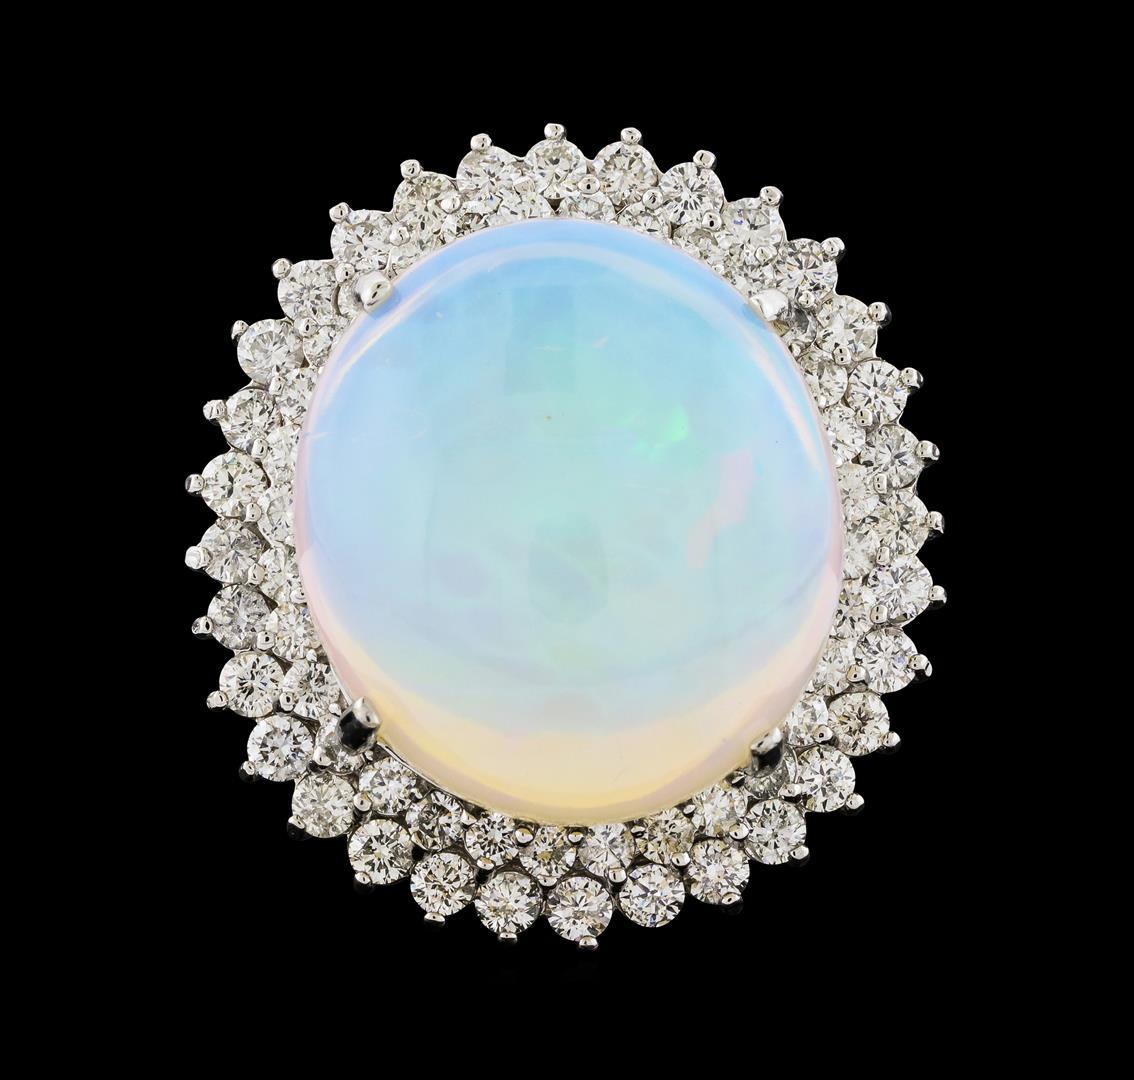 17.42 ctw Opal and Diamond Ring - 14KT White Gold